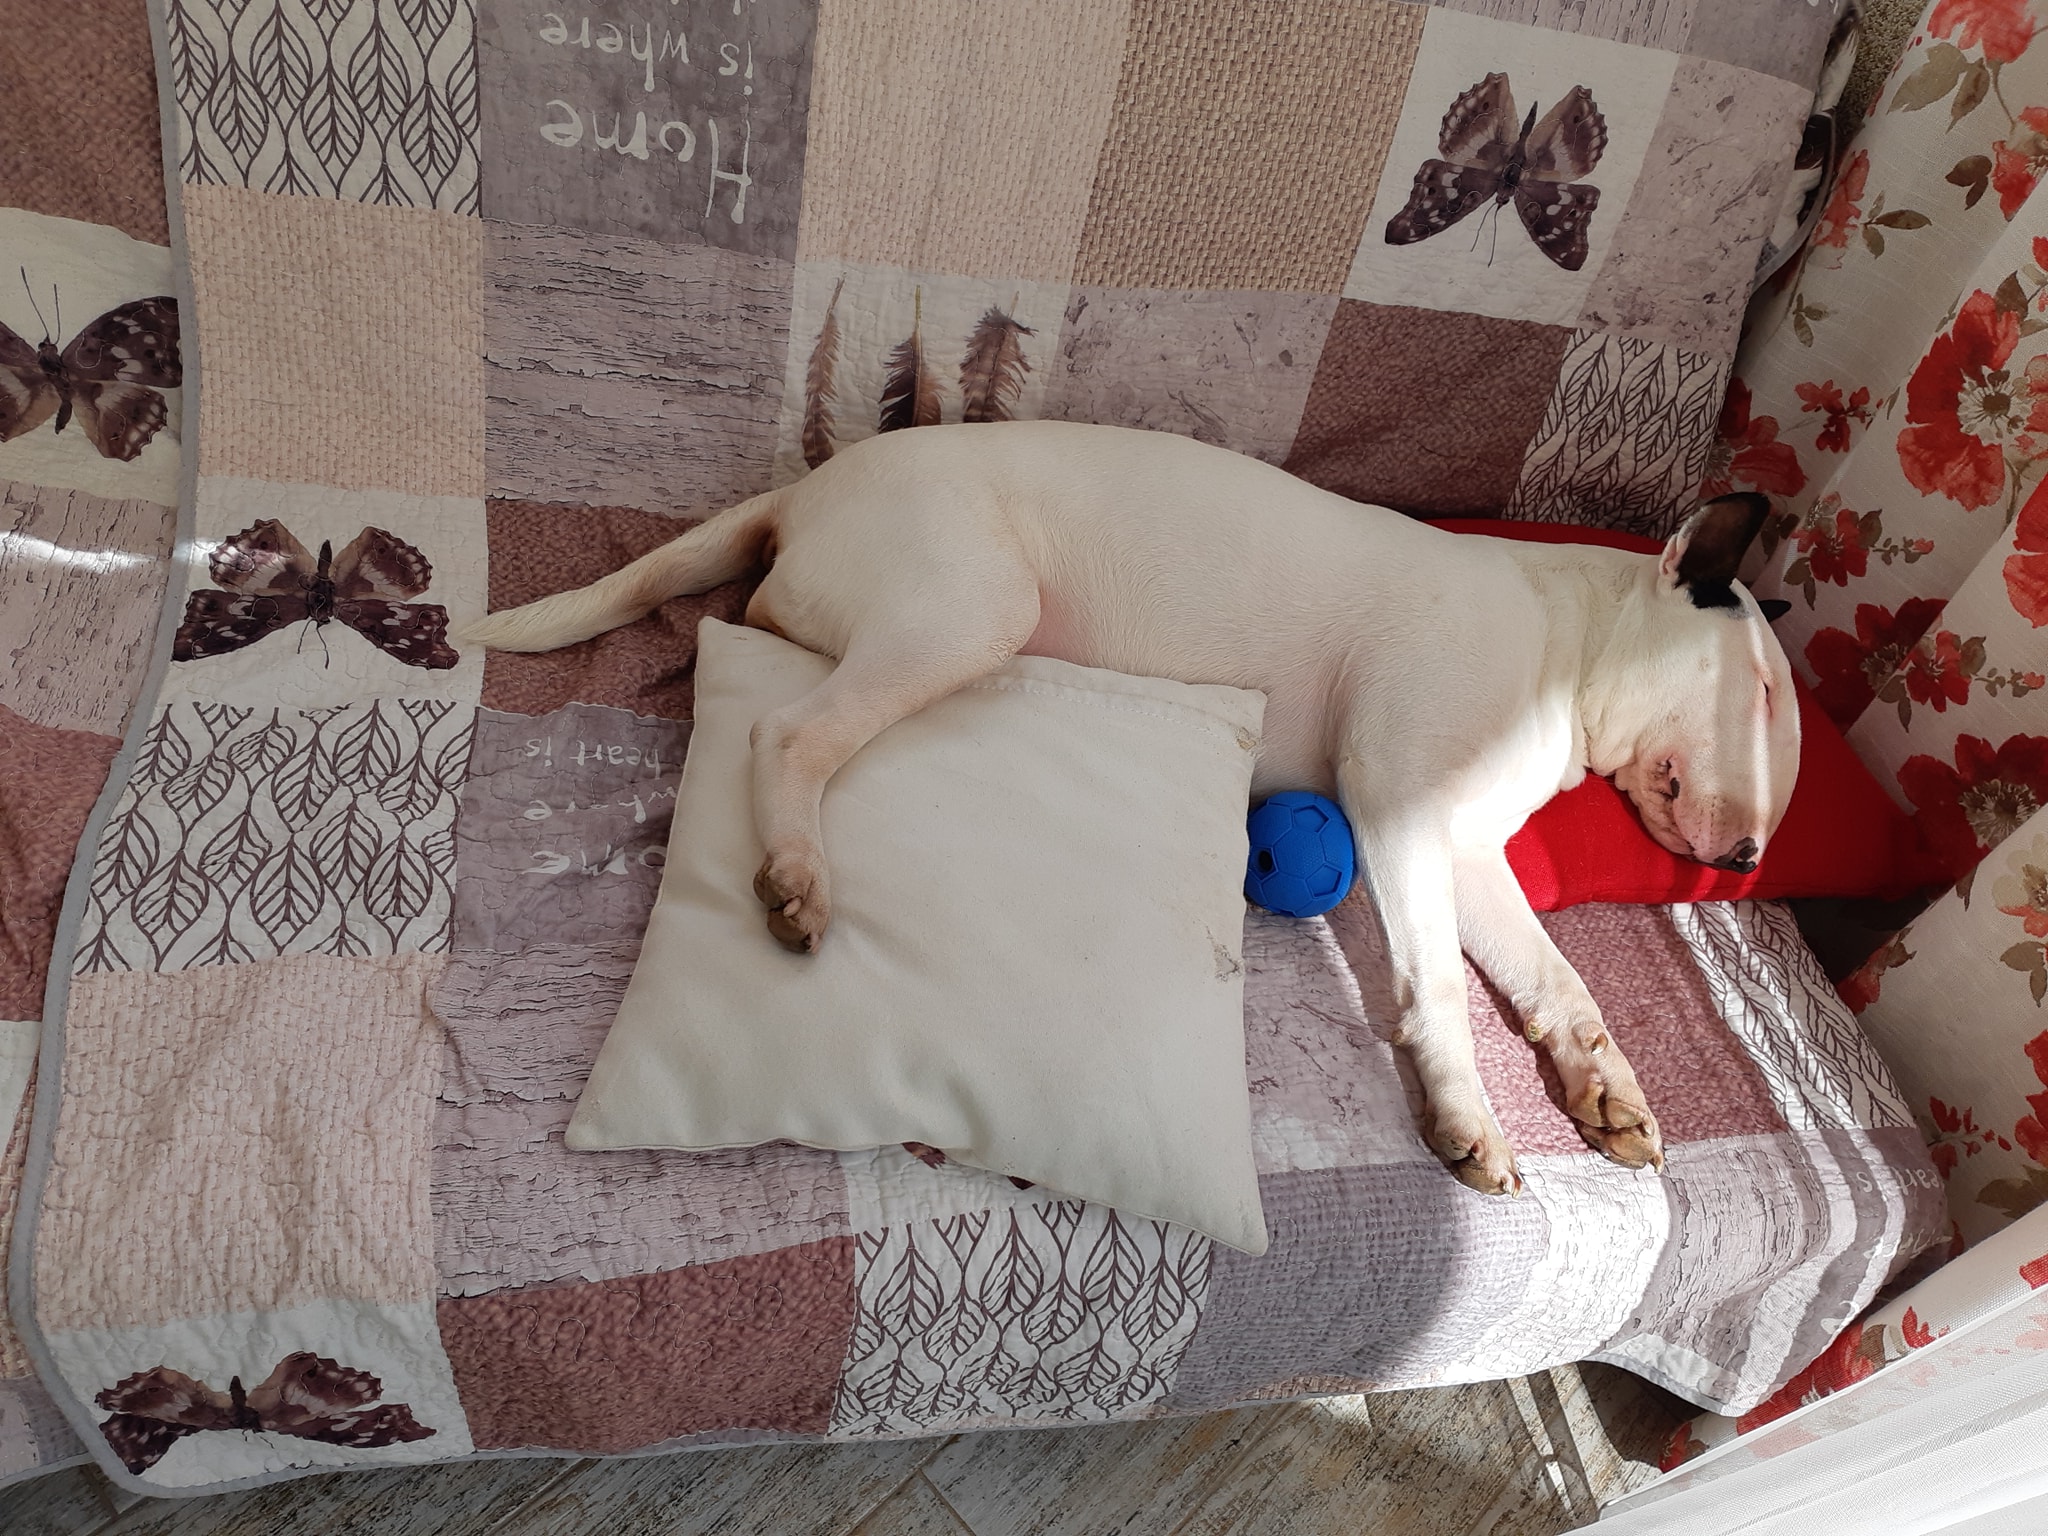 A Bull Terrier sleeping on the couch with a pillow in between its legs